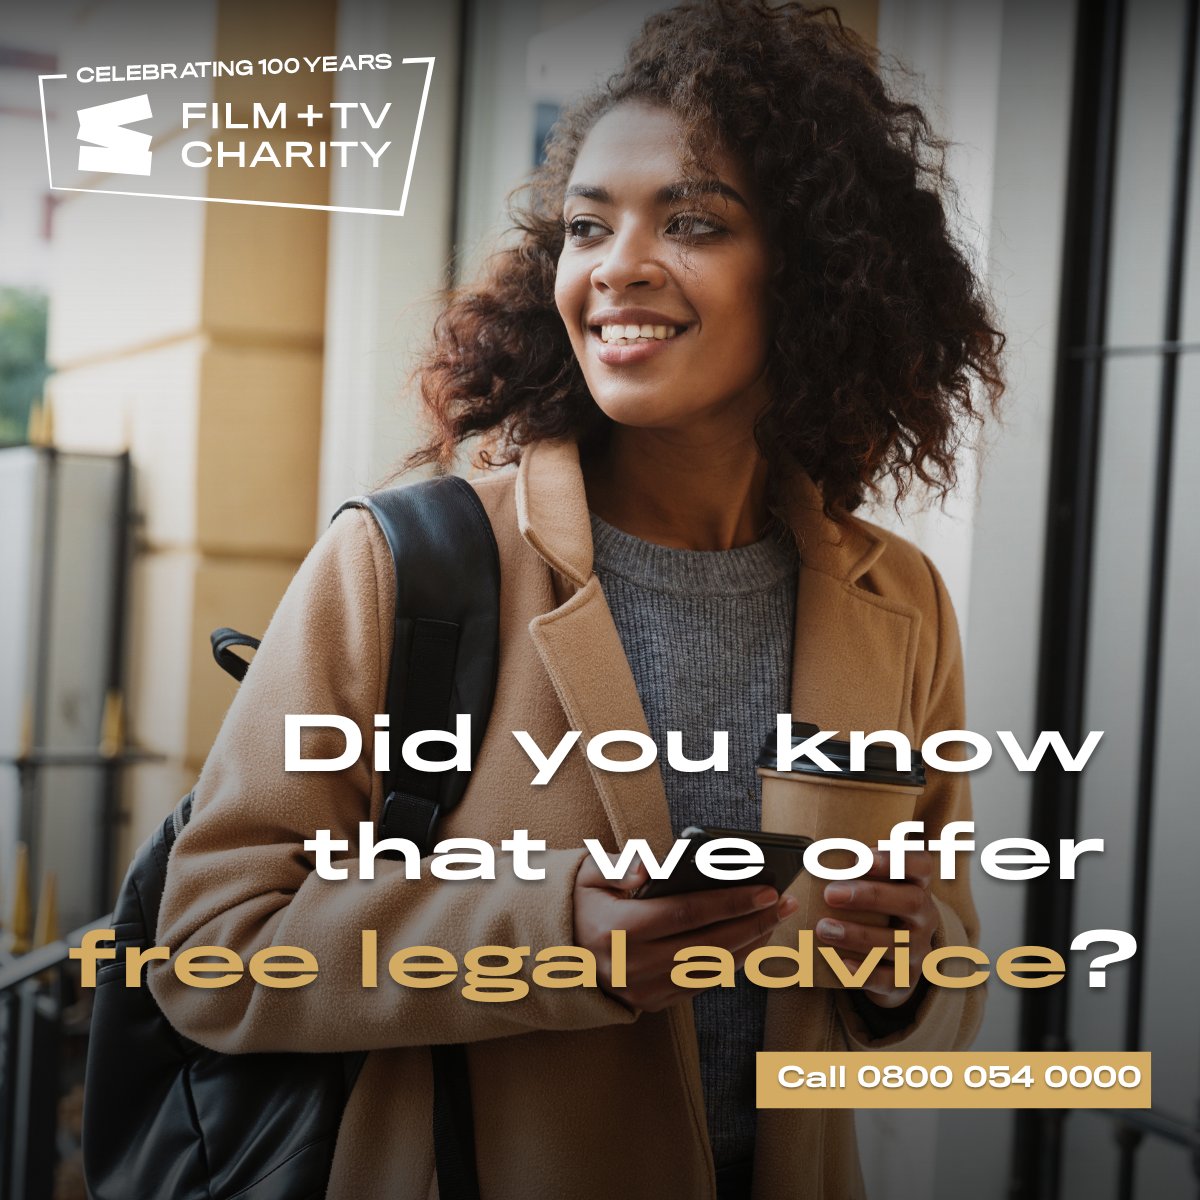 Access free legal advice today - It's available for anyone working in a behind the scenes role in film, TV, or cinema, for personal or business needs. Get in touch via our Support Line on 𝟬𝟴𝟬𝟬 𝟬𝟱𝟰 𝟬𝟬𝟬𝟬 #WeAreFilmAndTV #LegalAdvice